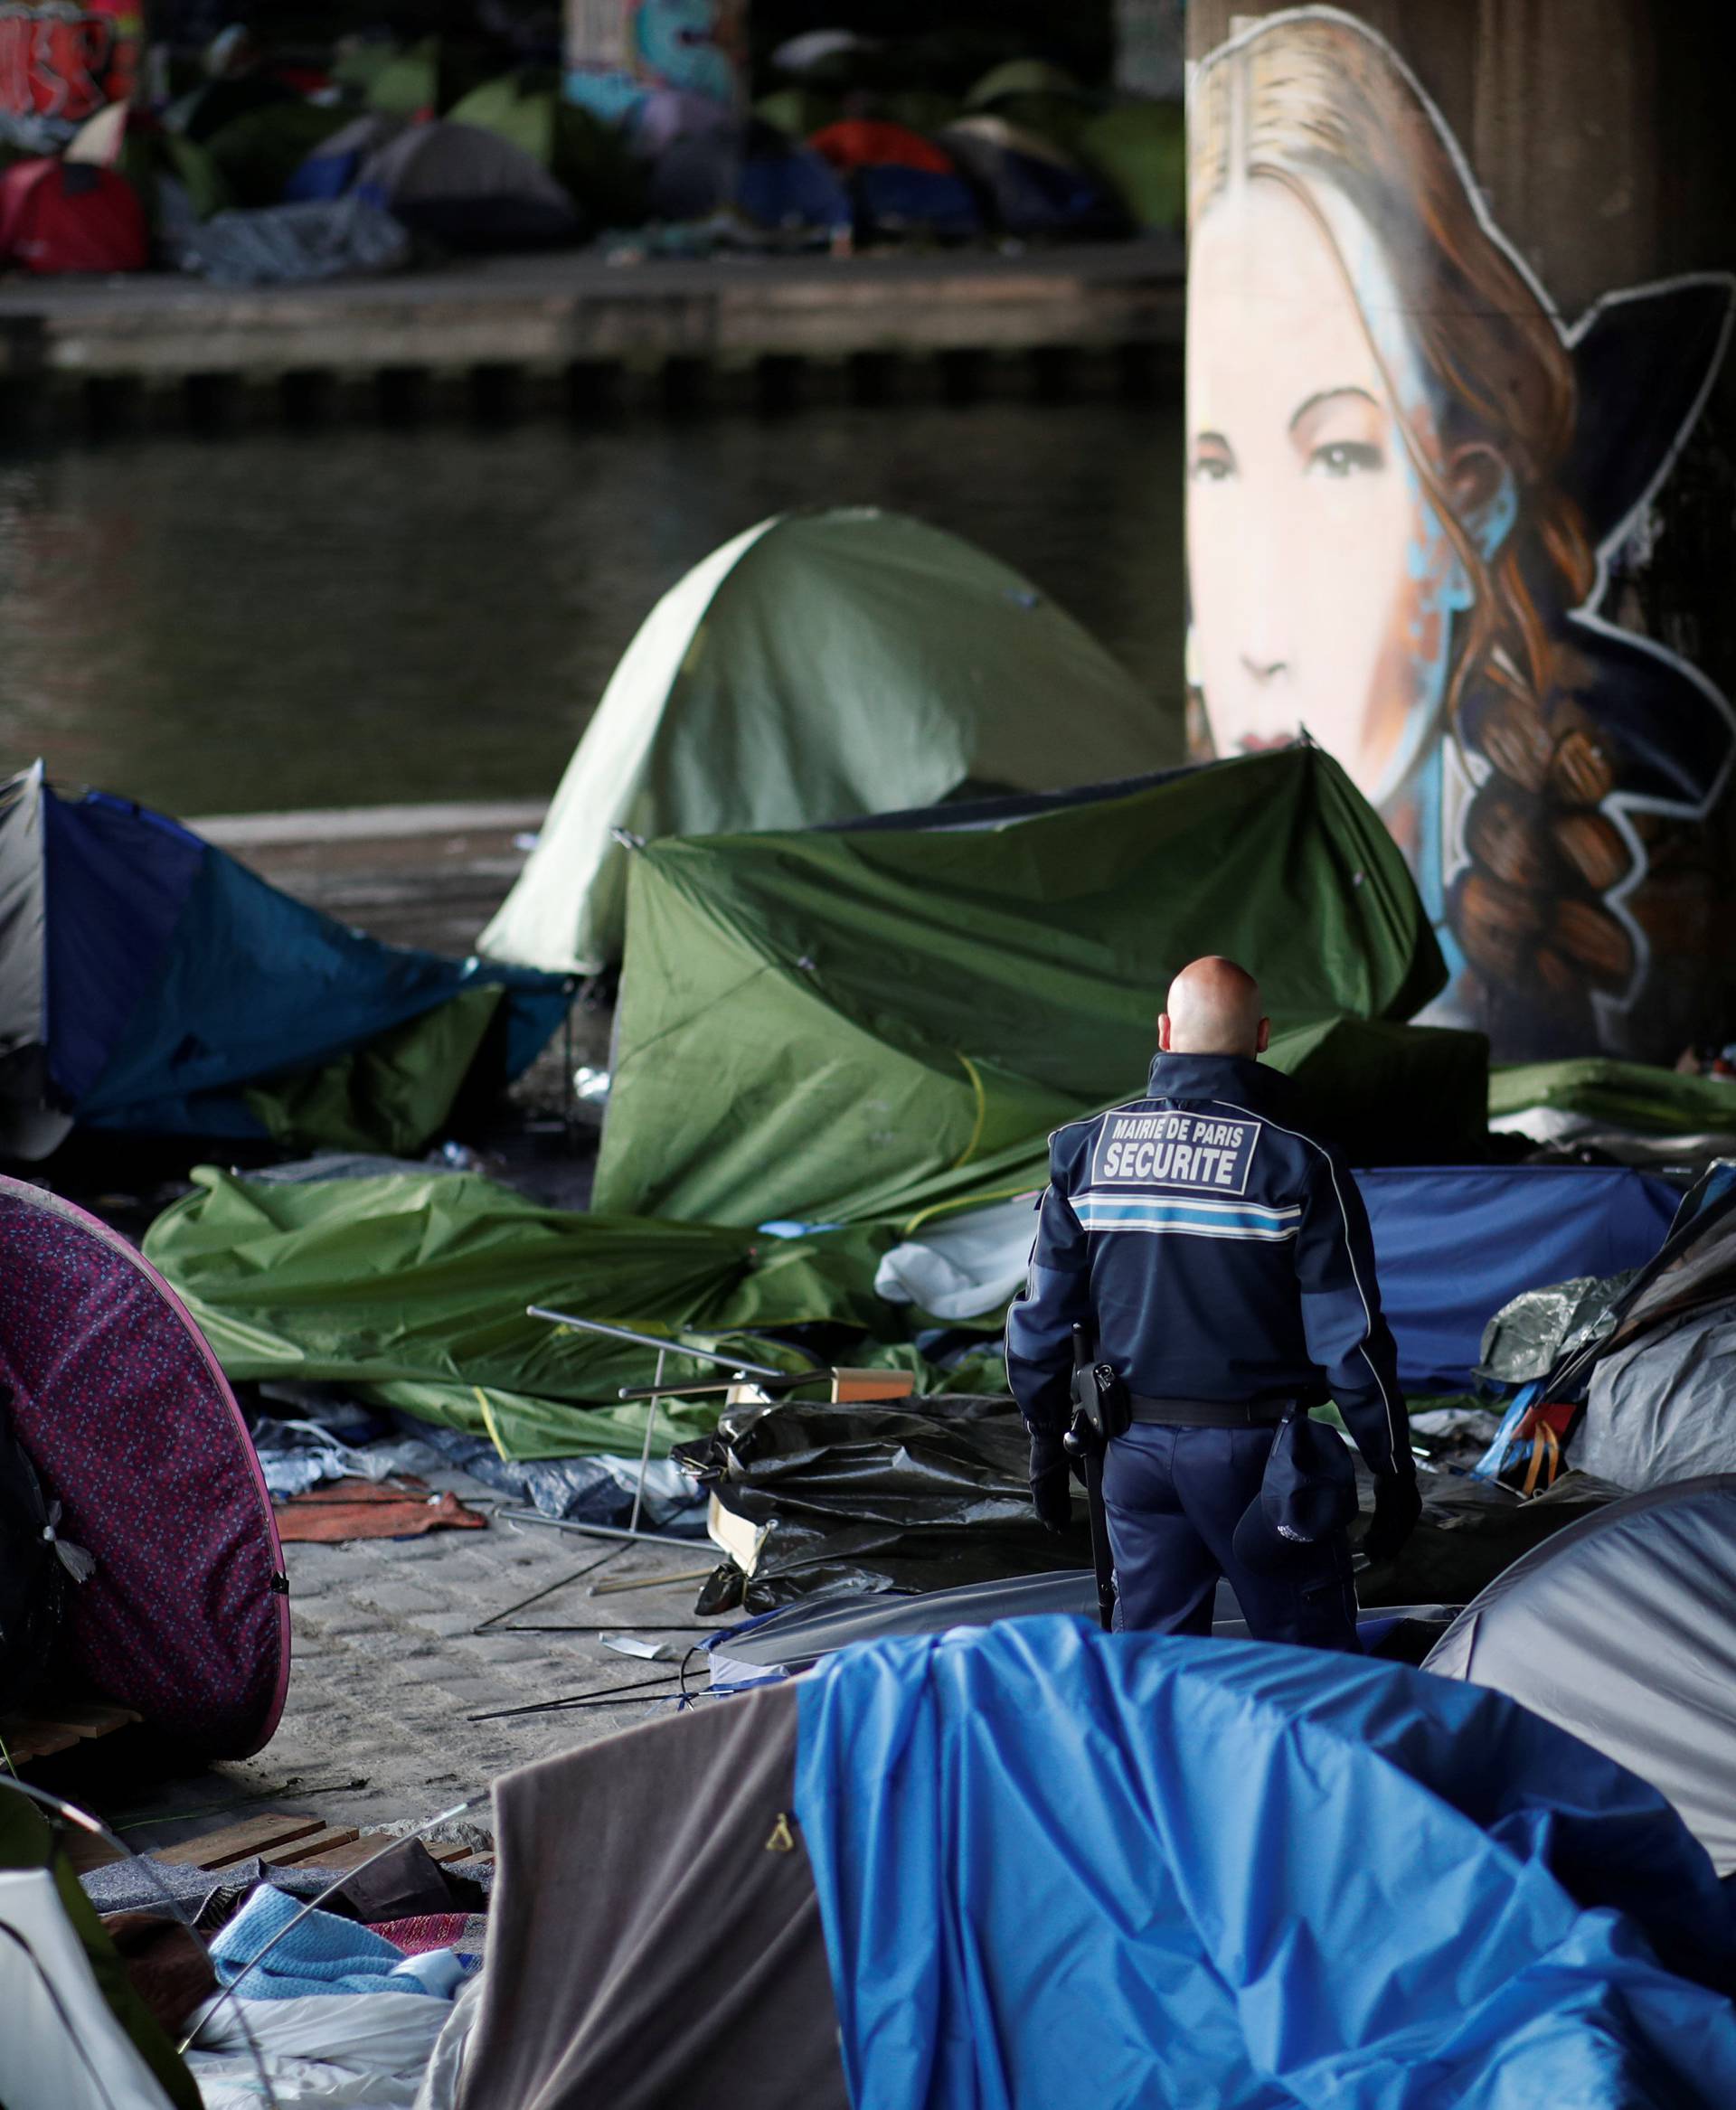 A municipal security guard stands in the midst of abandoned tent and belongings as French police evacuate hundreds of migrants living in tents along a canal in Paris